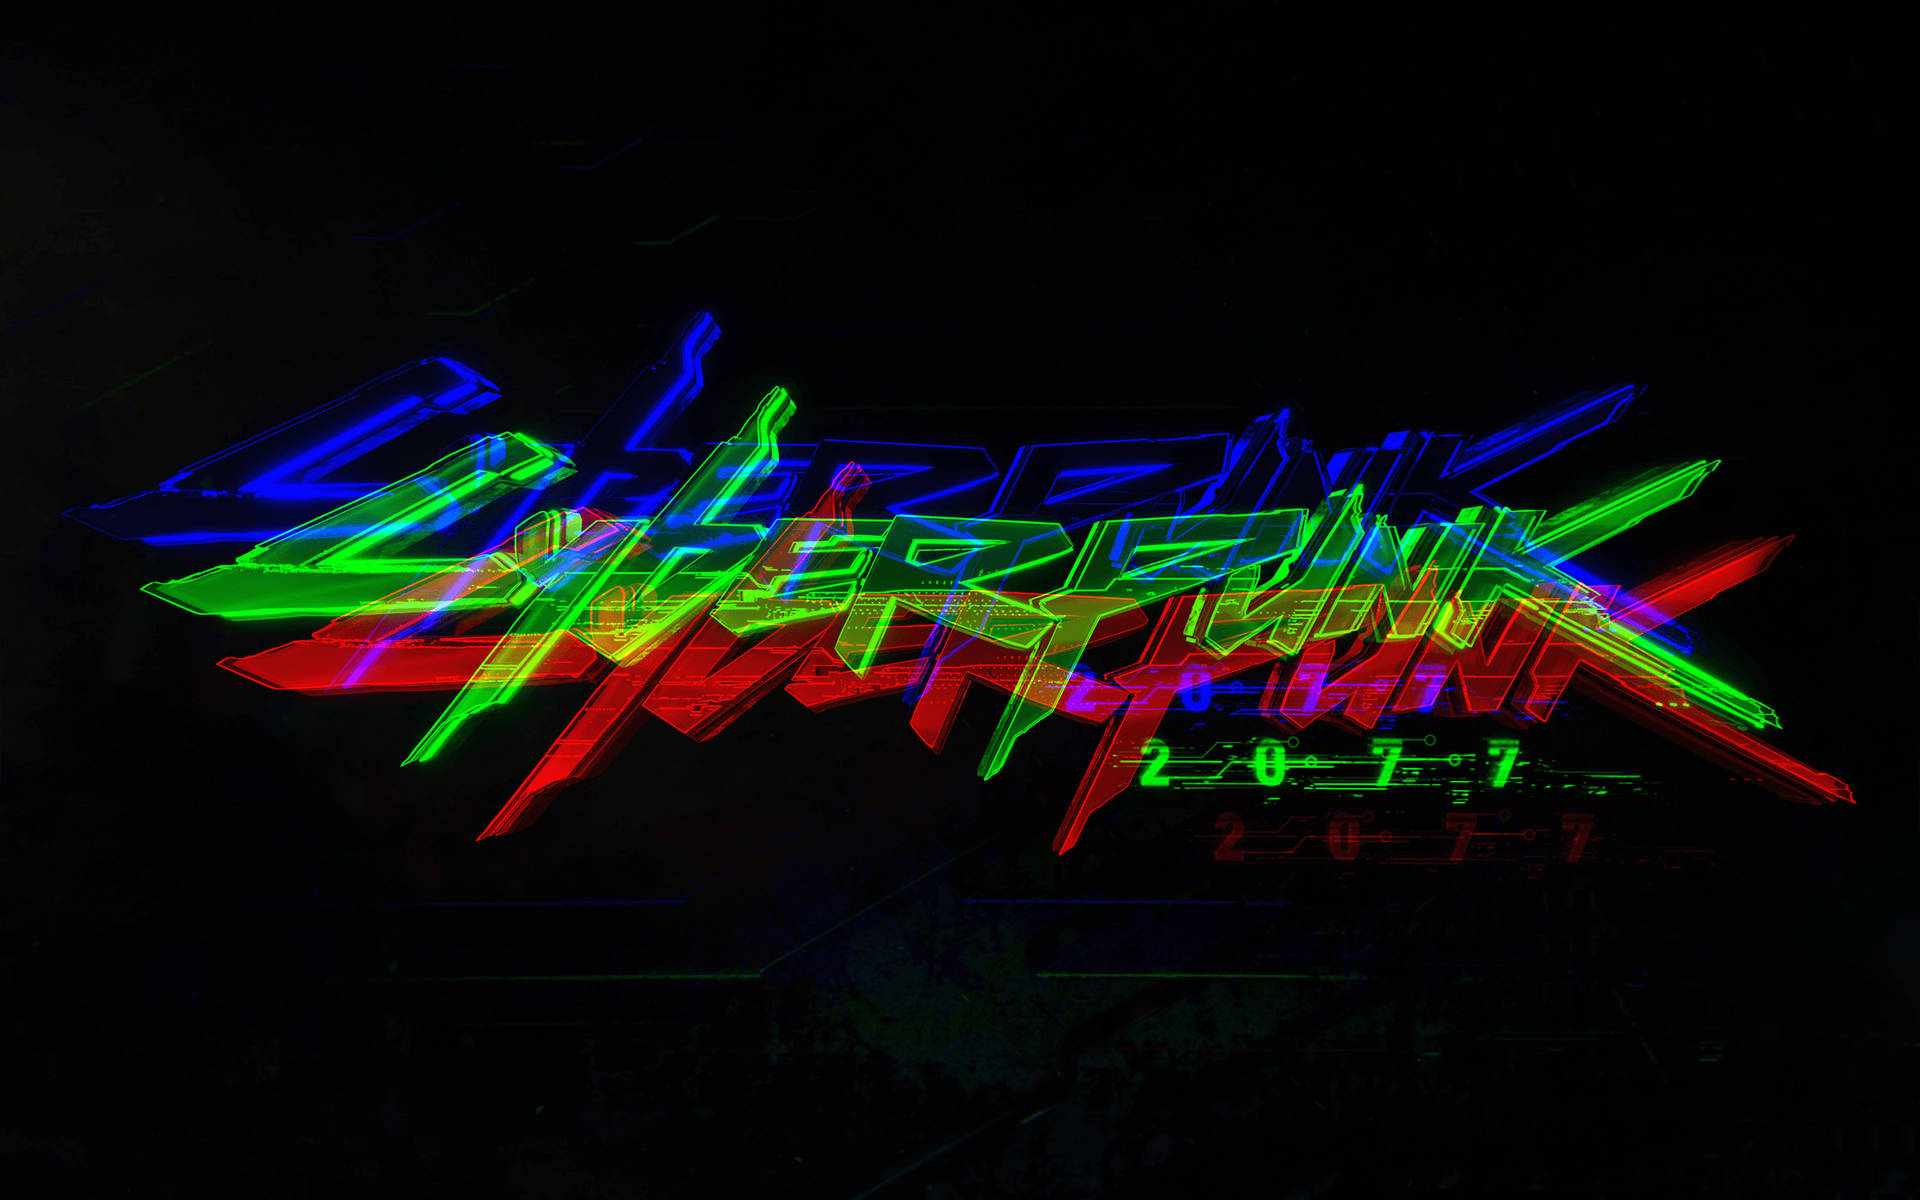 Spiky and vibrant, the RGB logo for Cyberpunk 2077 Wallpaper